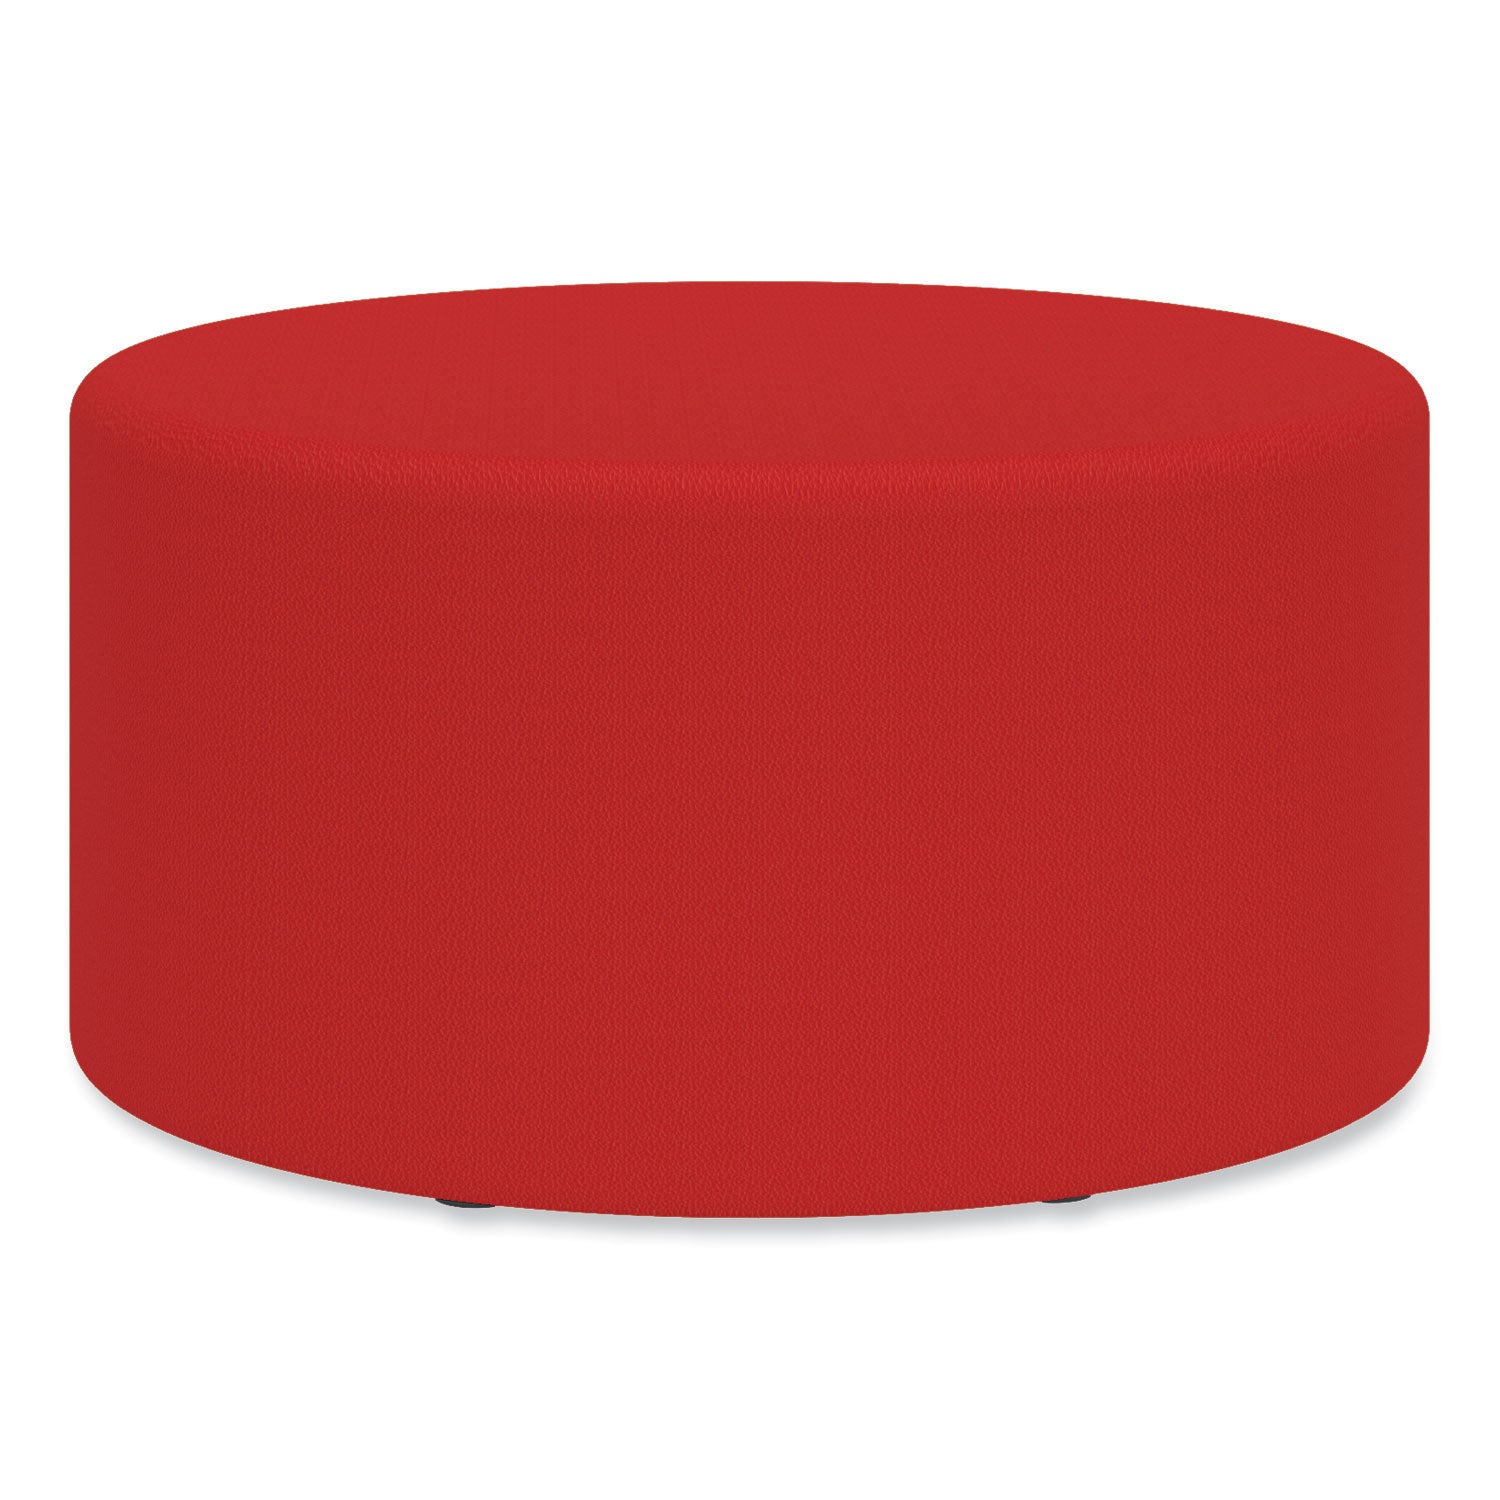 learn-30-cylinder-vinyl-ottoman-30w-x-30d-x-18h-red-ships-in-1-3-business-days_saf8123rv - 2